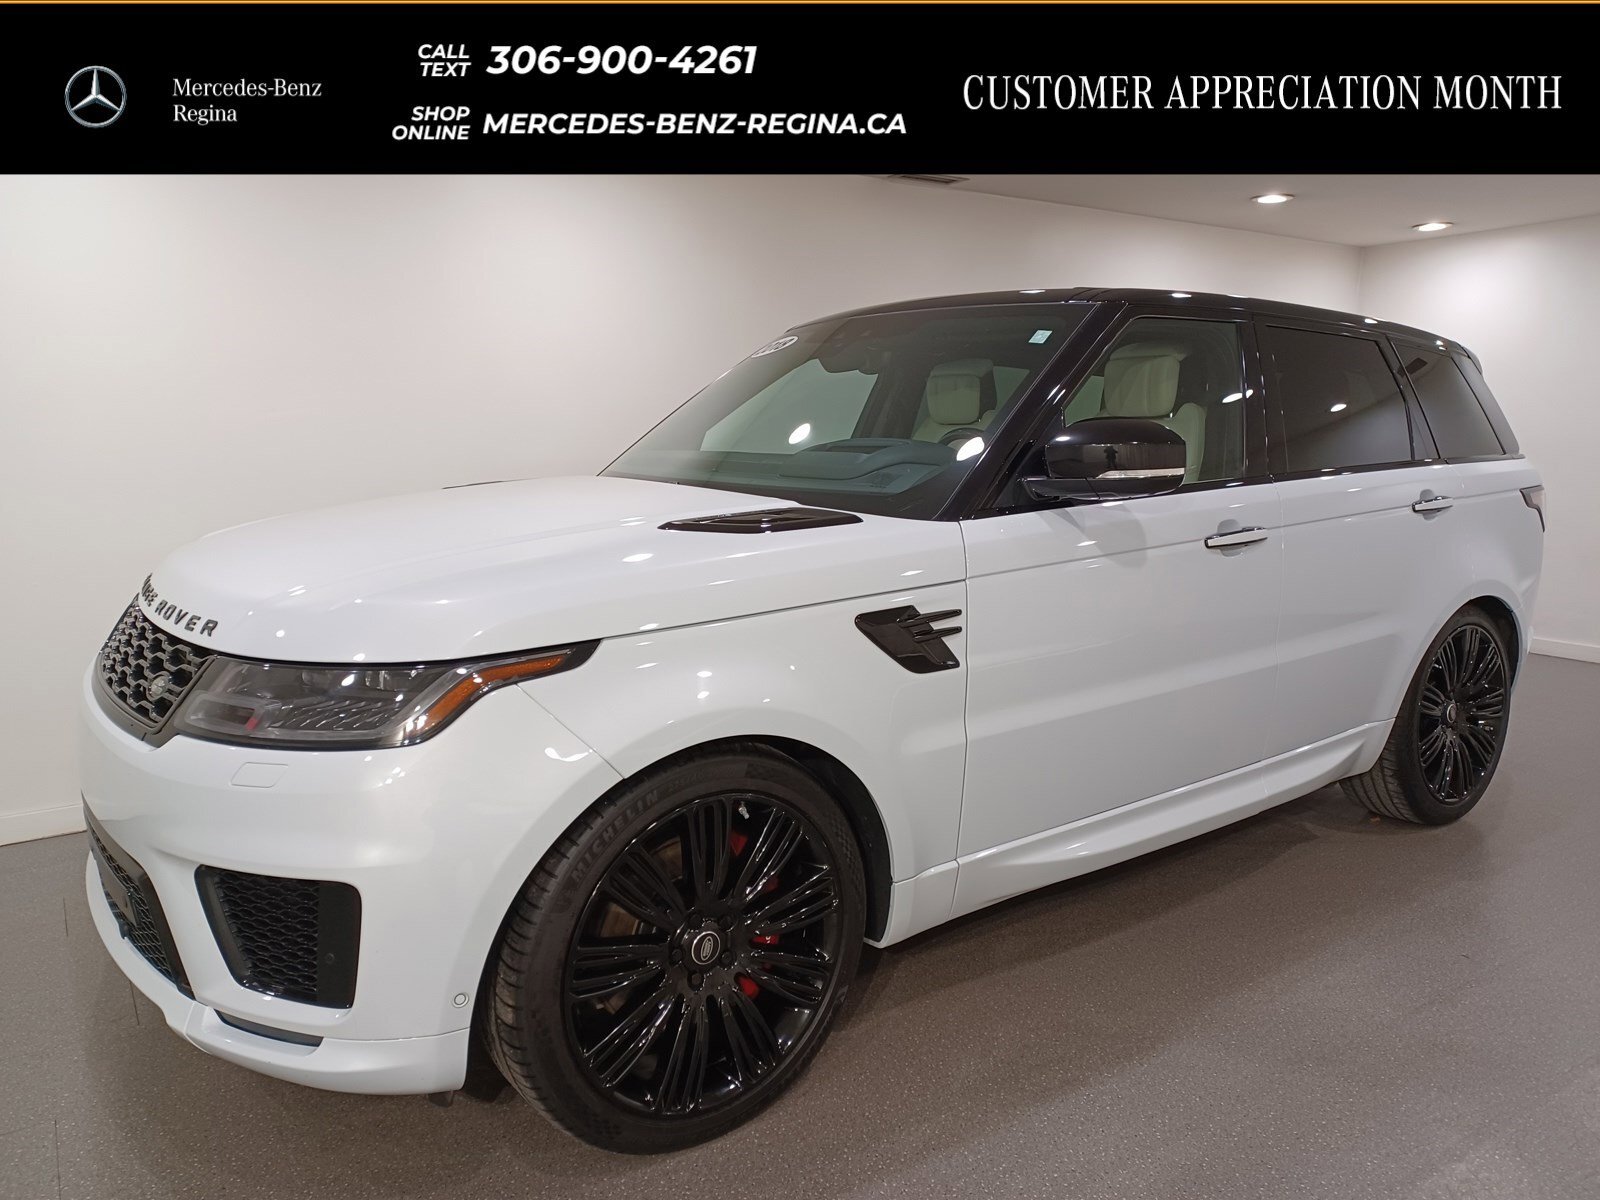 2018 Land Rover Range Rover Sport Autobiography Dynamic , Supercharged, 518 HP / 461